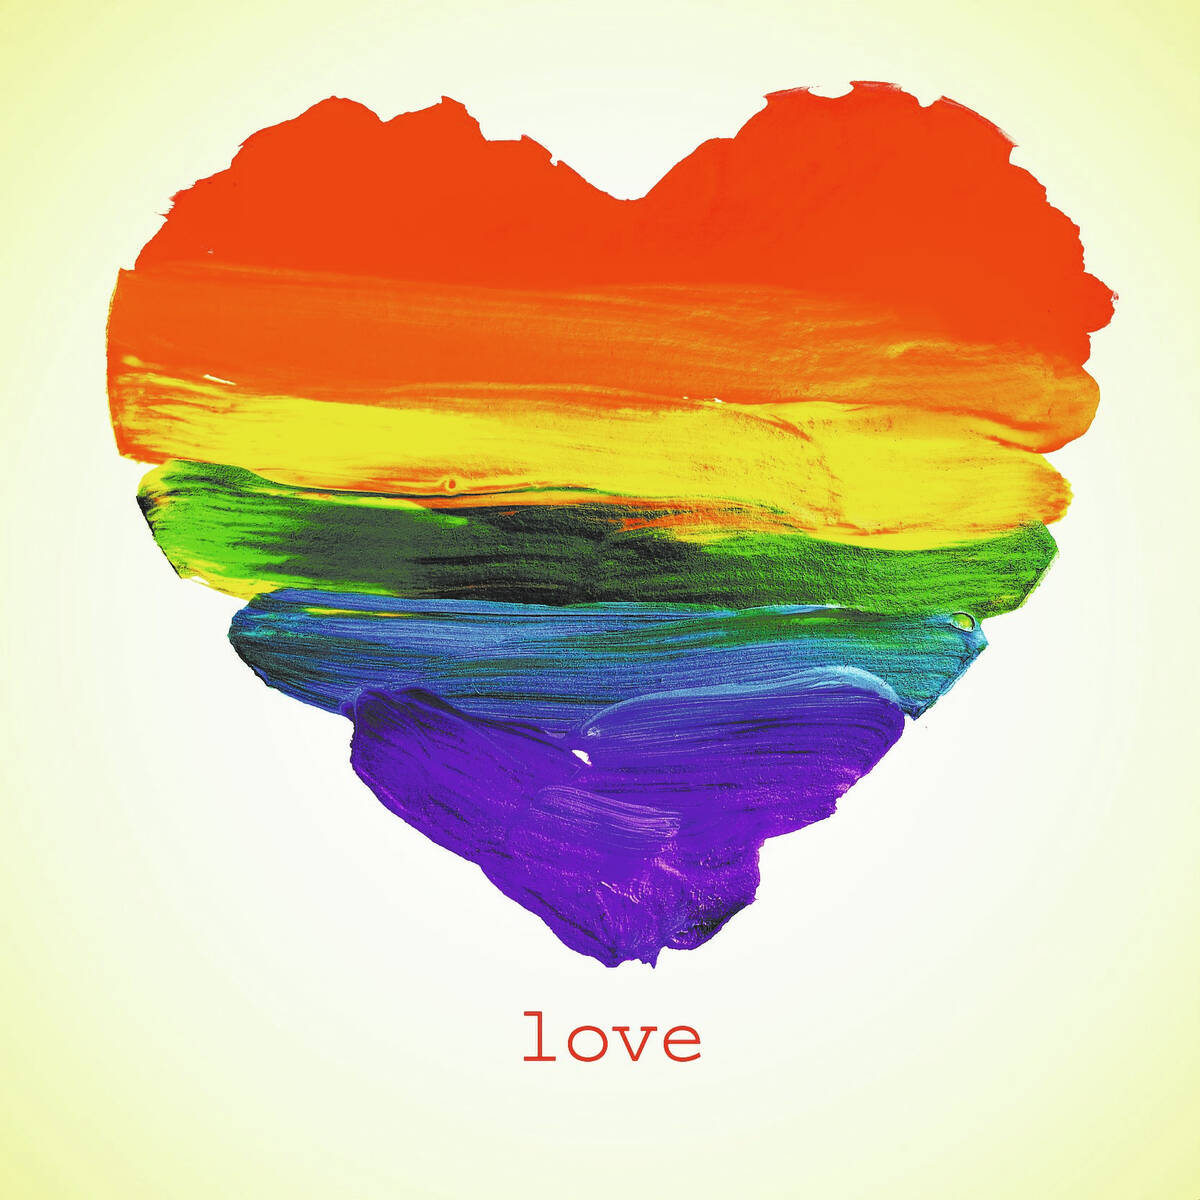 the word love and a rainbow heart painted on a beige background, with a retro effect